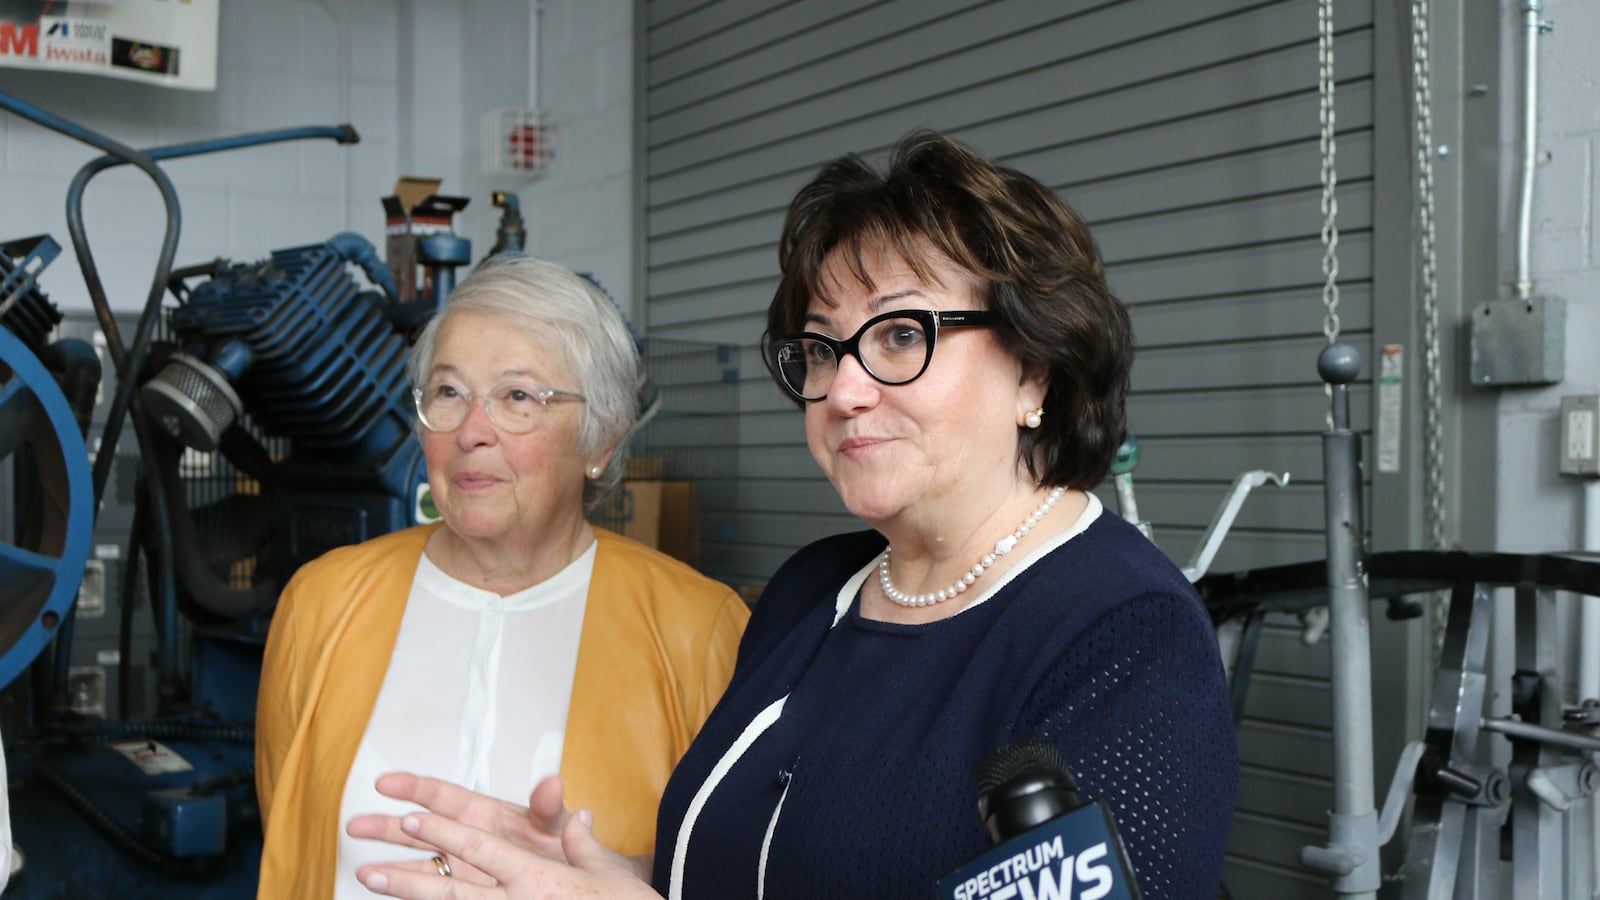 New York City Schools Chancellor Carmen Fariña and State Education Commissioner MaryEllen Elia at Thomas A. Edison Career and Technical Education High School.